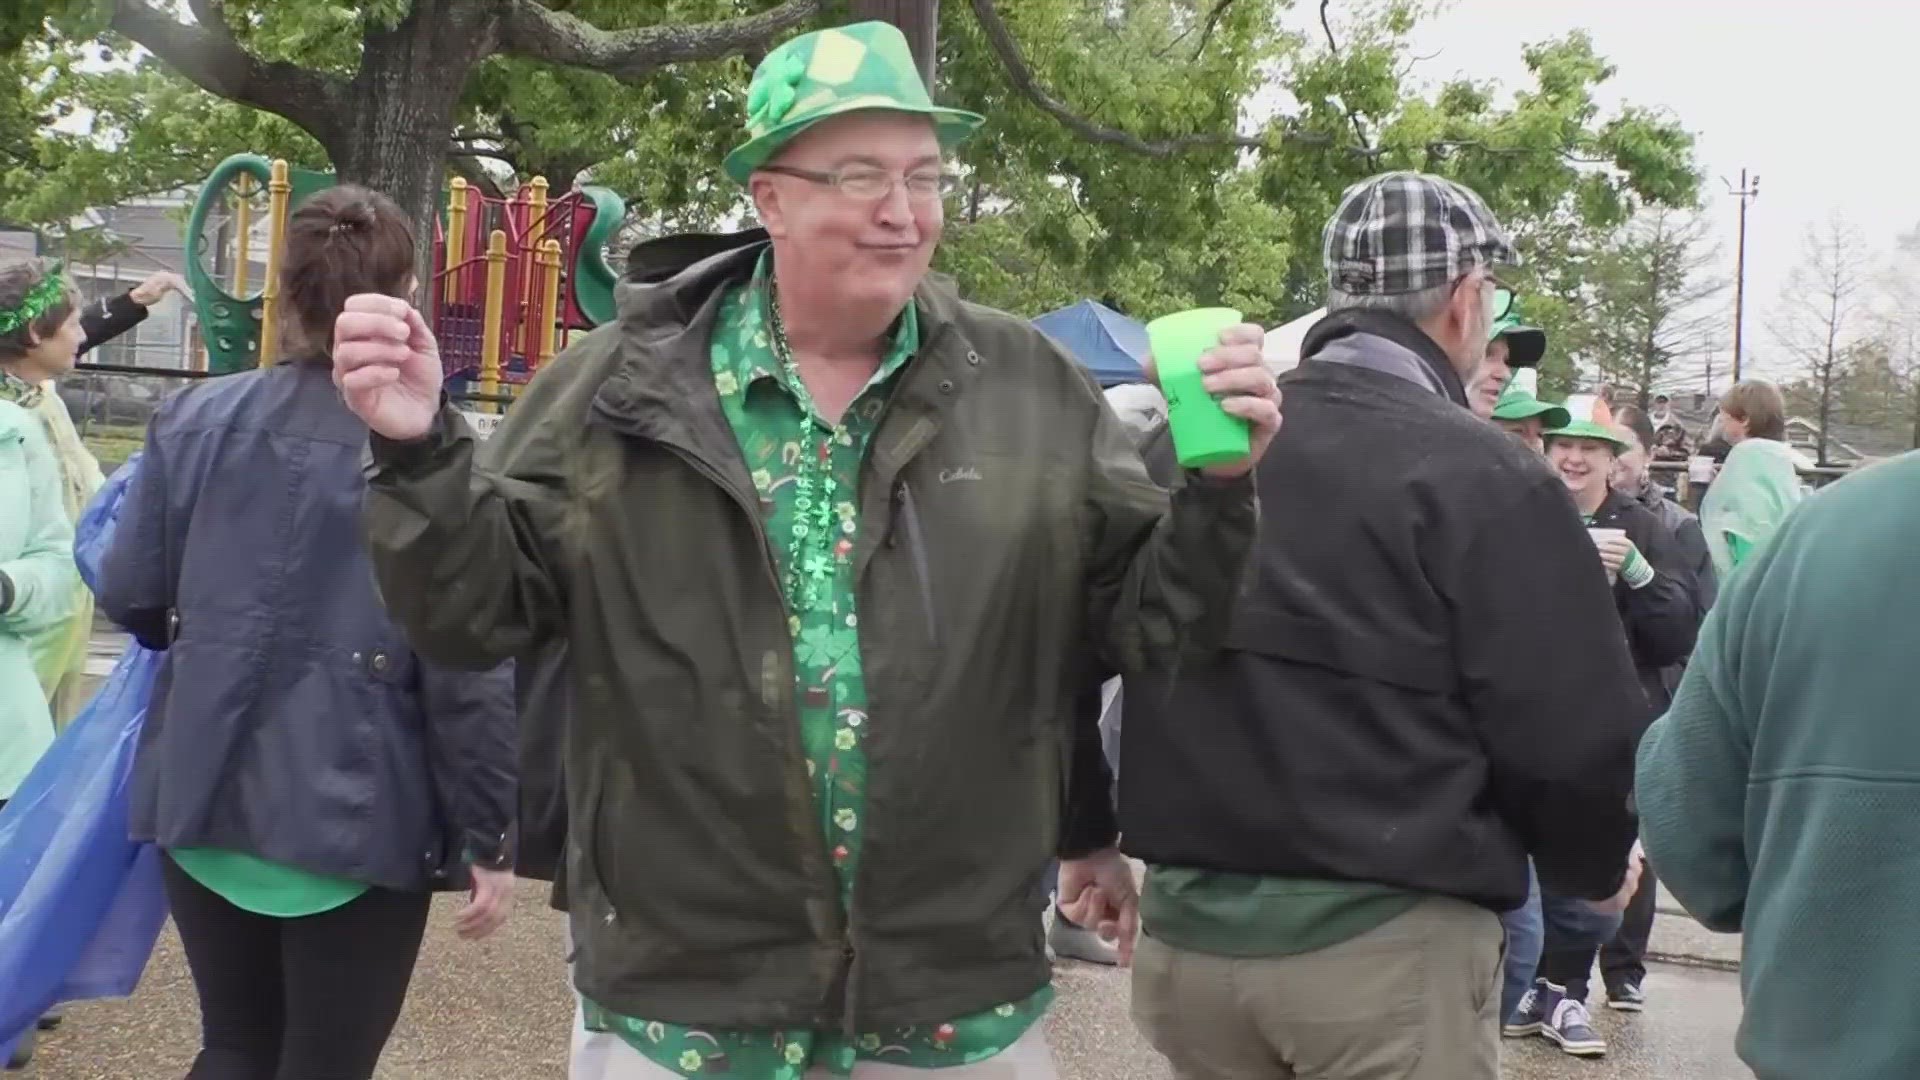 St. Michael's Special School holds an annual block party every St. Patrick's Day to raise money for tuition assistance.